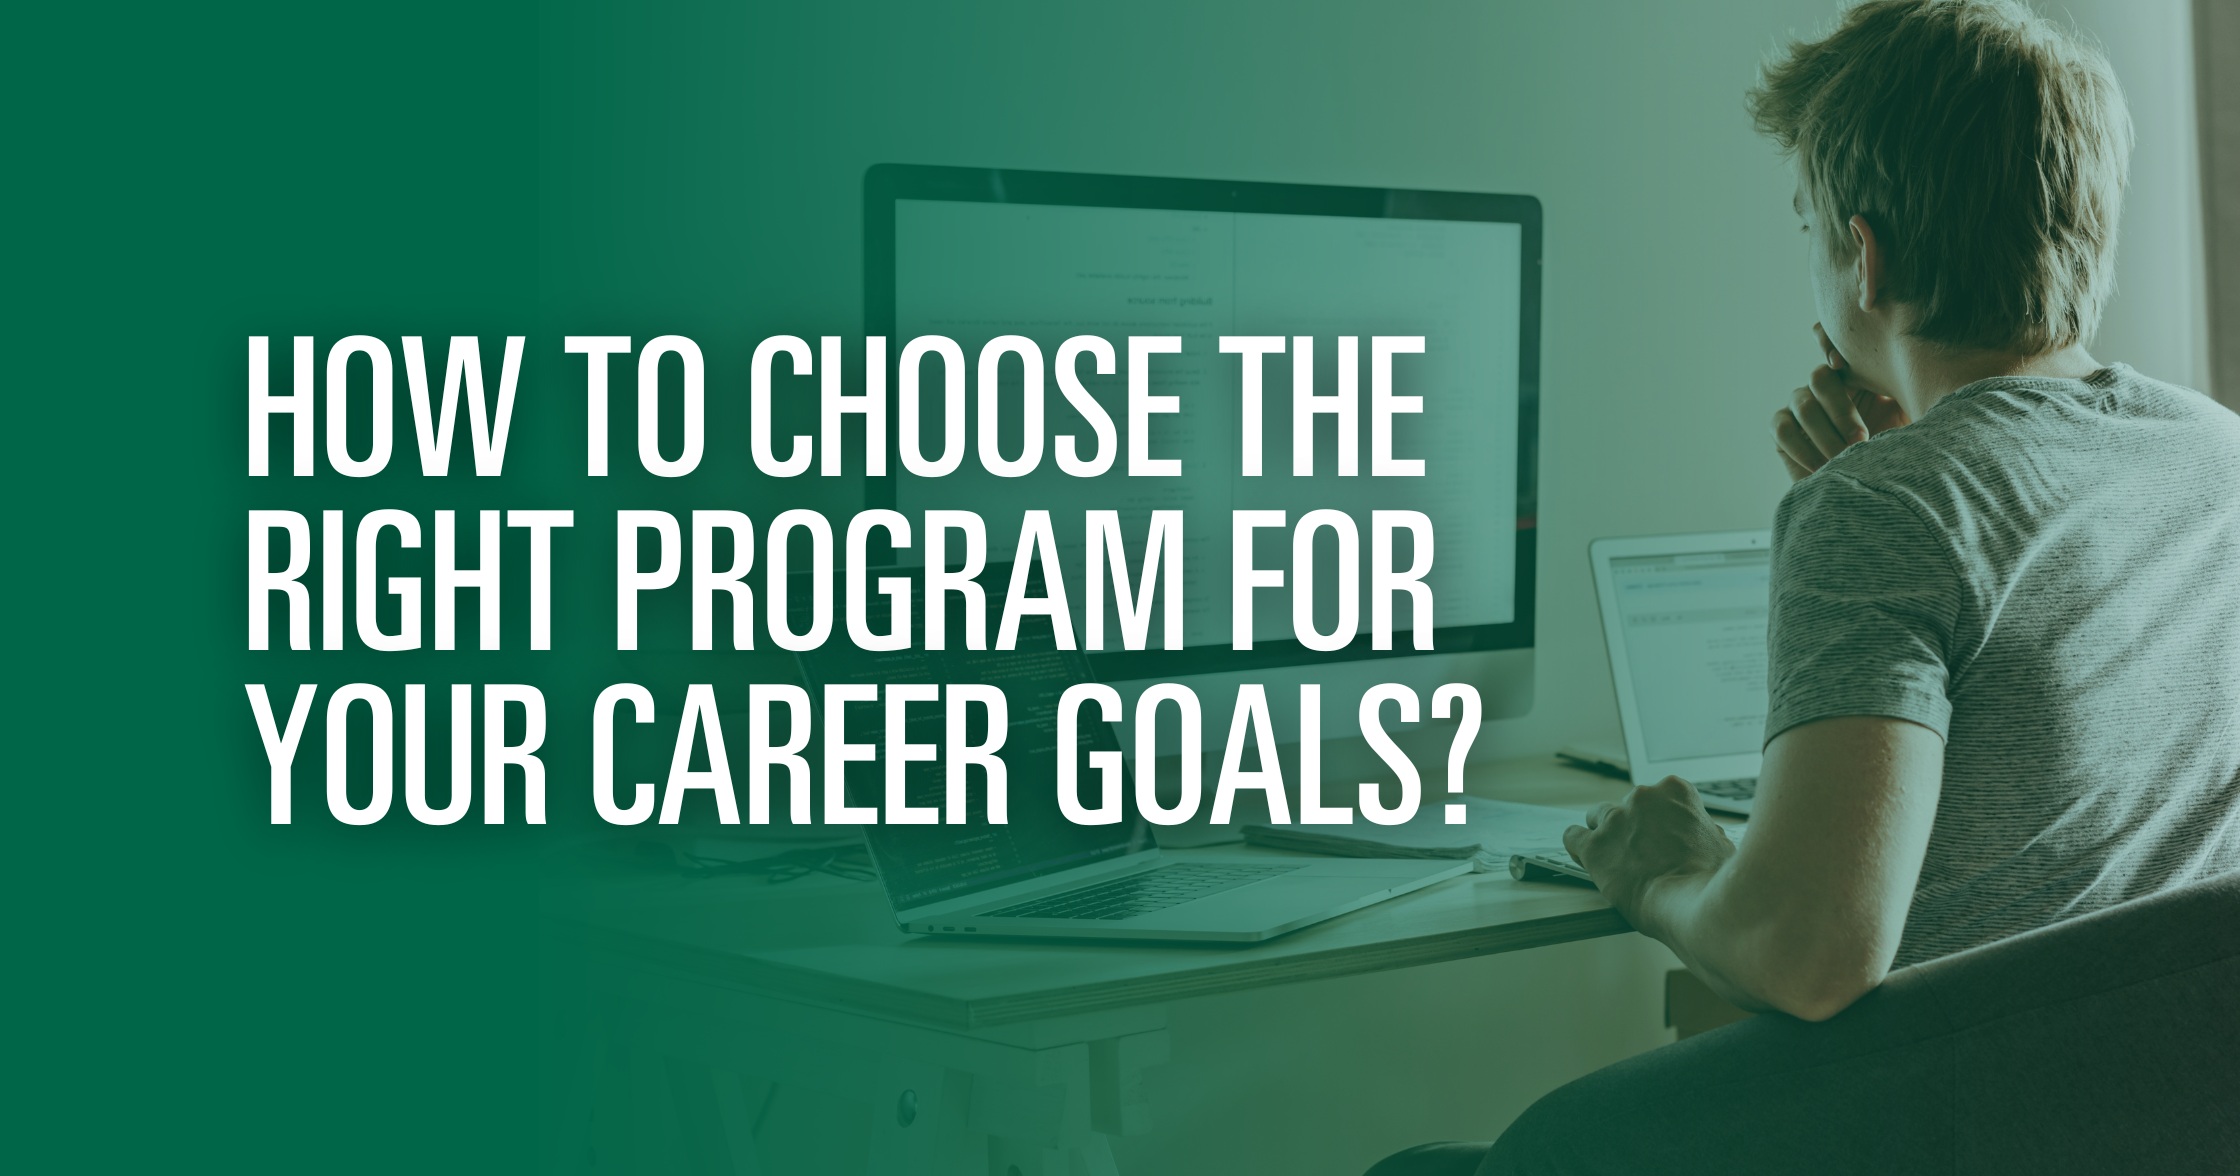 How to Choose the Right Part-Time Program for Your Career Goals?